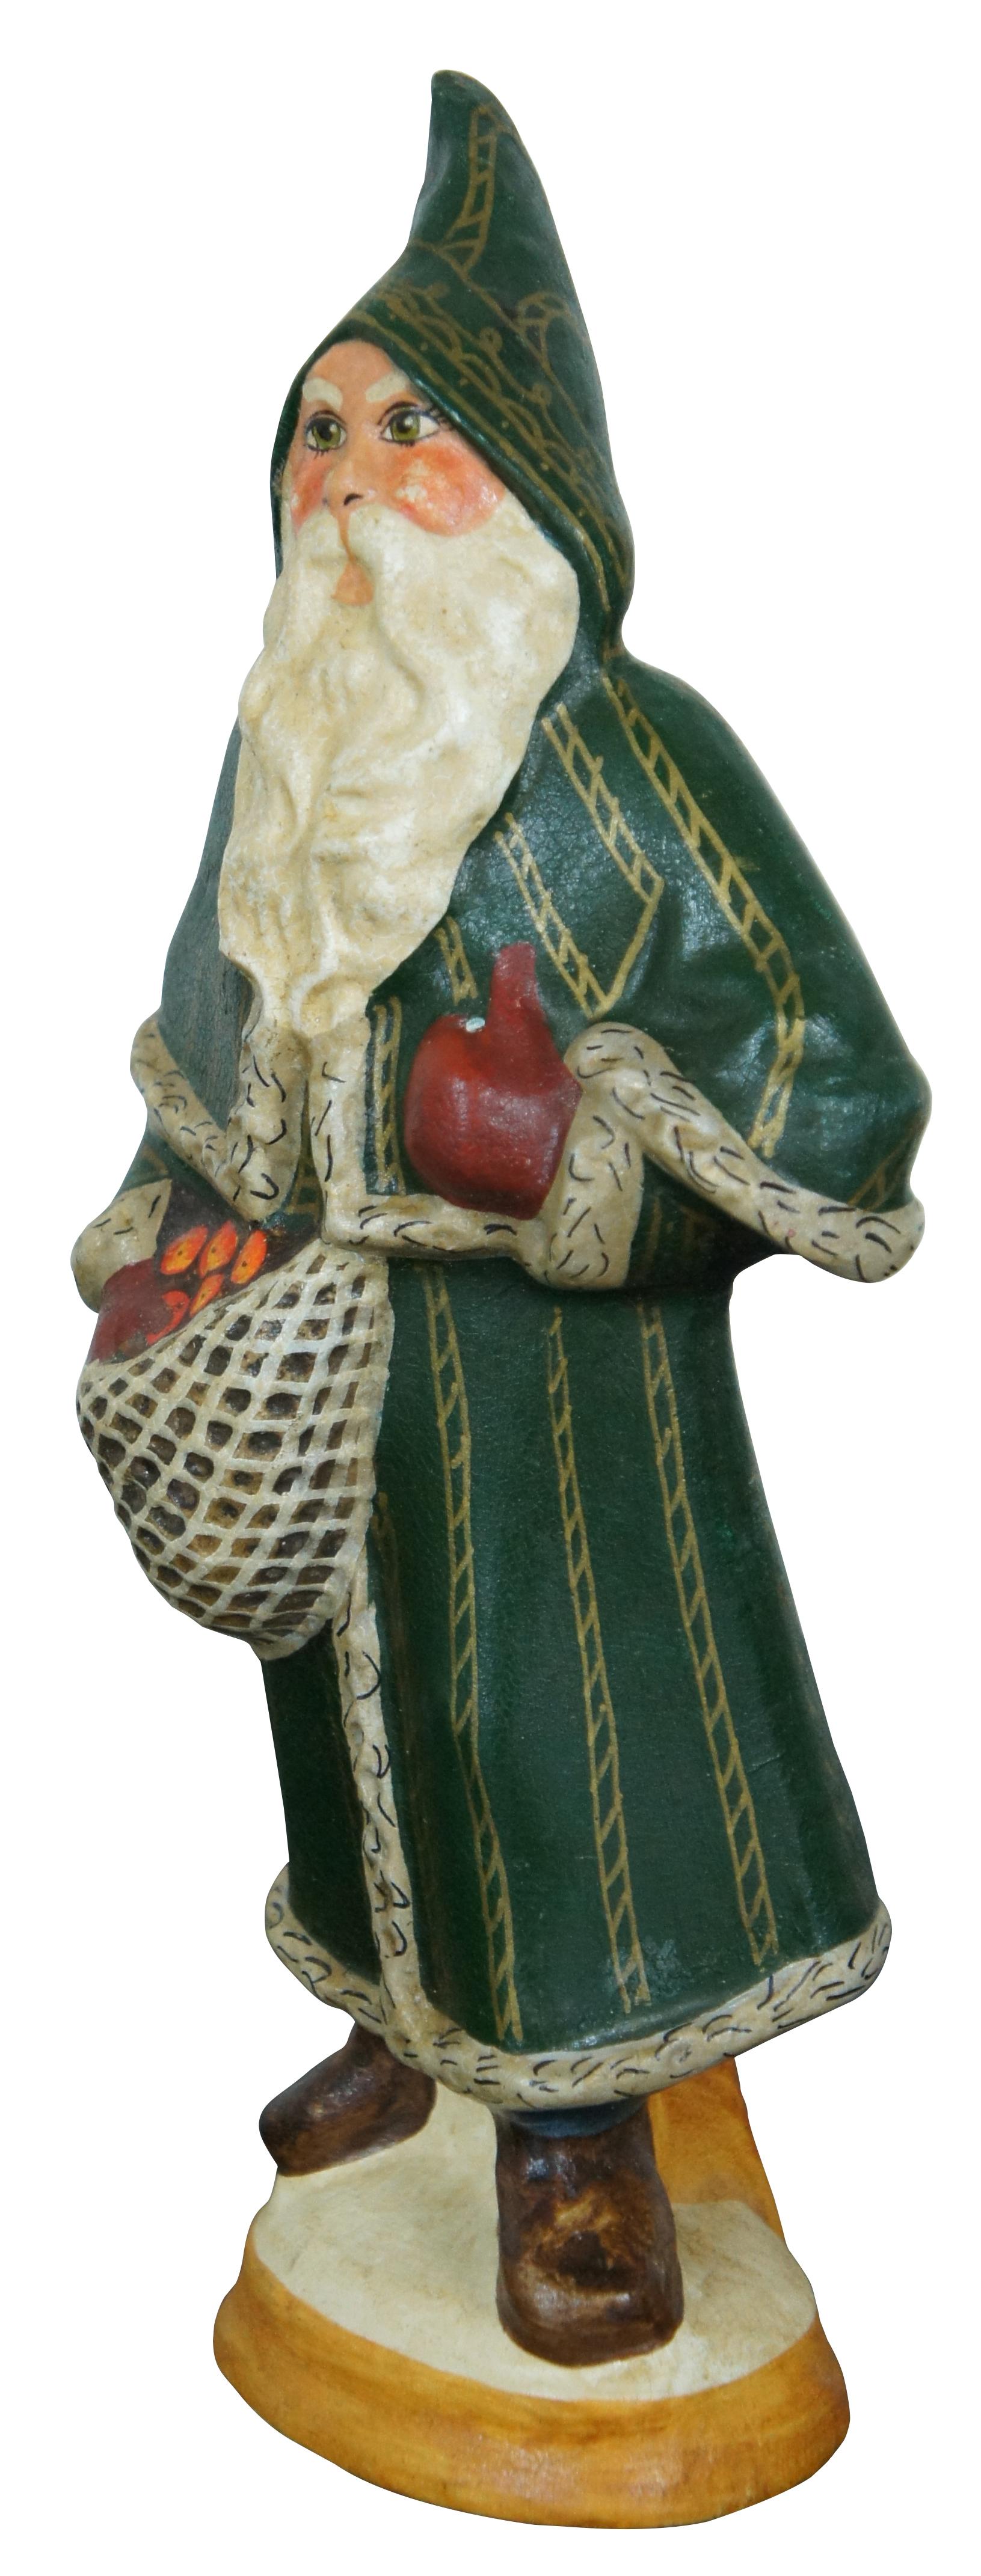 Vintage 1992 Vaillancourt Folk Art chalkware figurine #1219 of Father Christmas or Santa Claus dressed in green and gold with a peaked hood and red gloves, carrying a woven sack of fruit, probably apples.
 